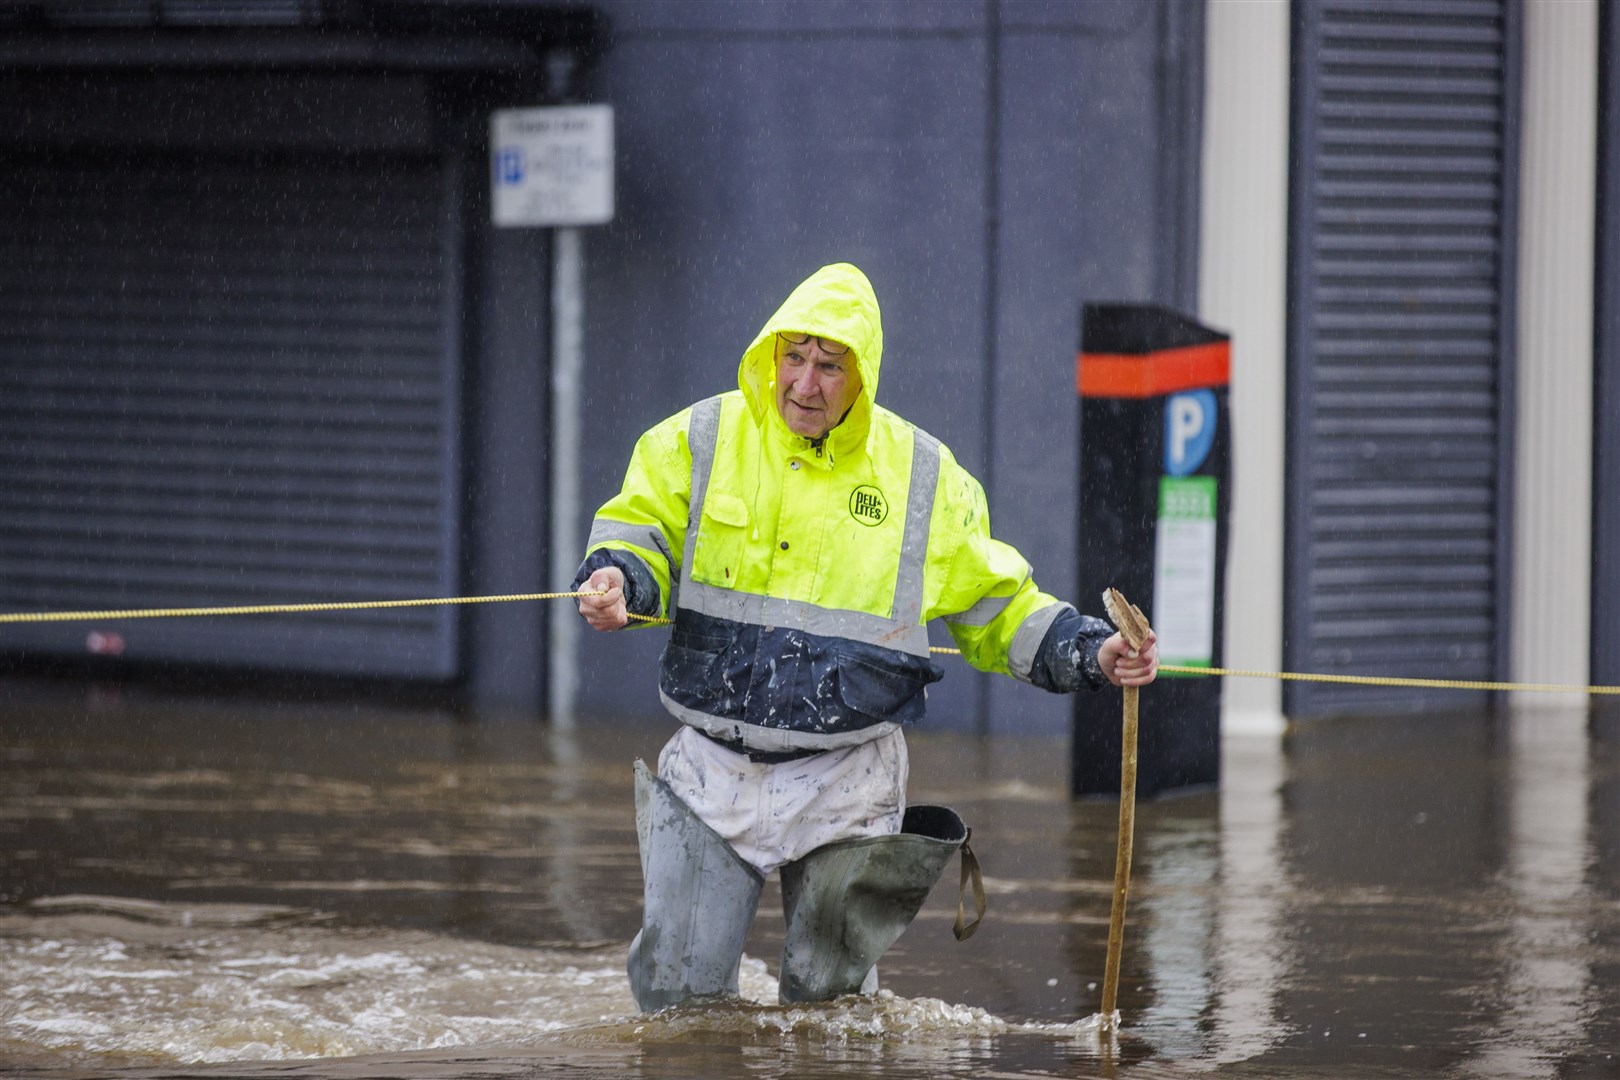 Gerry Peers uses a guide rope to cross flood water on Bank Parade in Newry (Liam McBurney/PA)